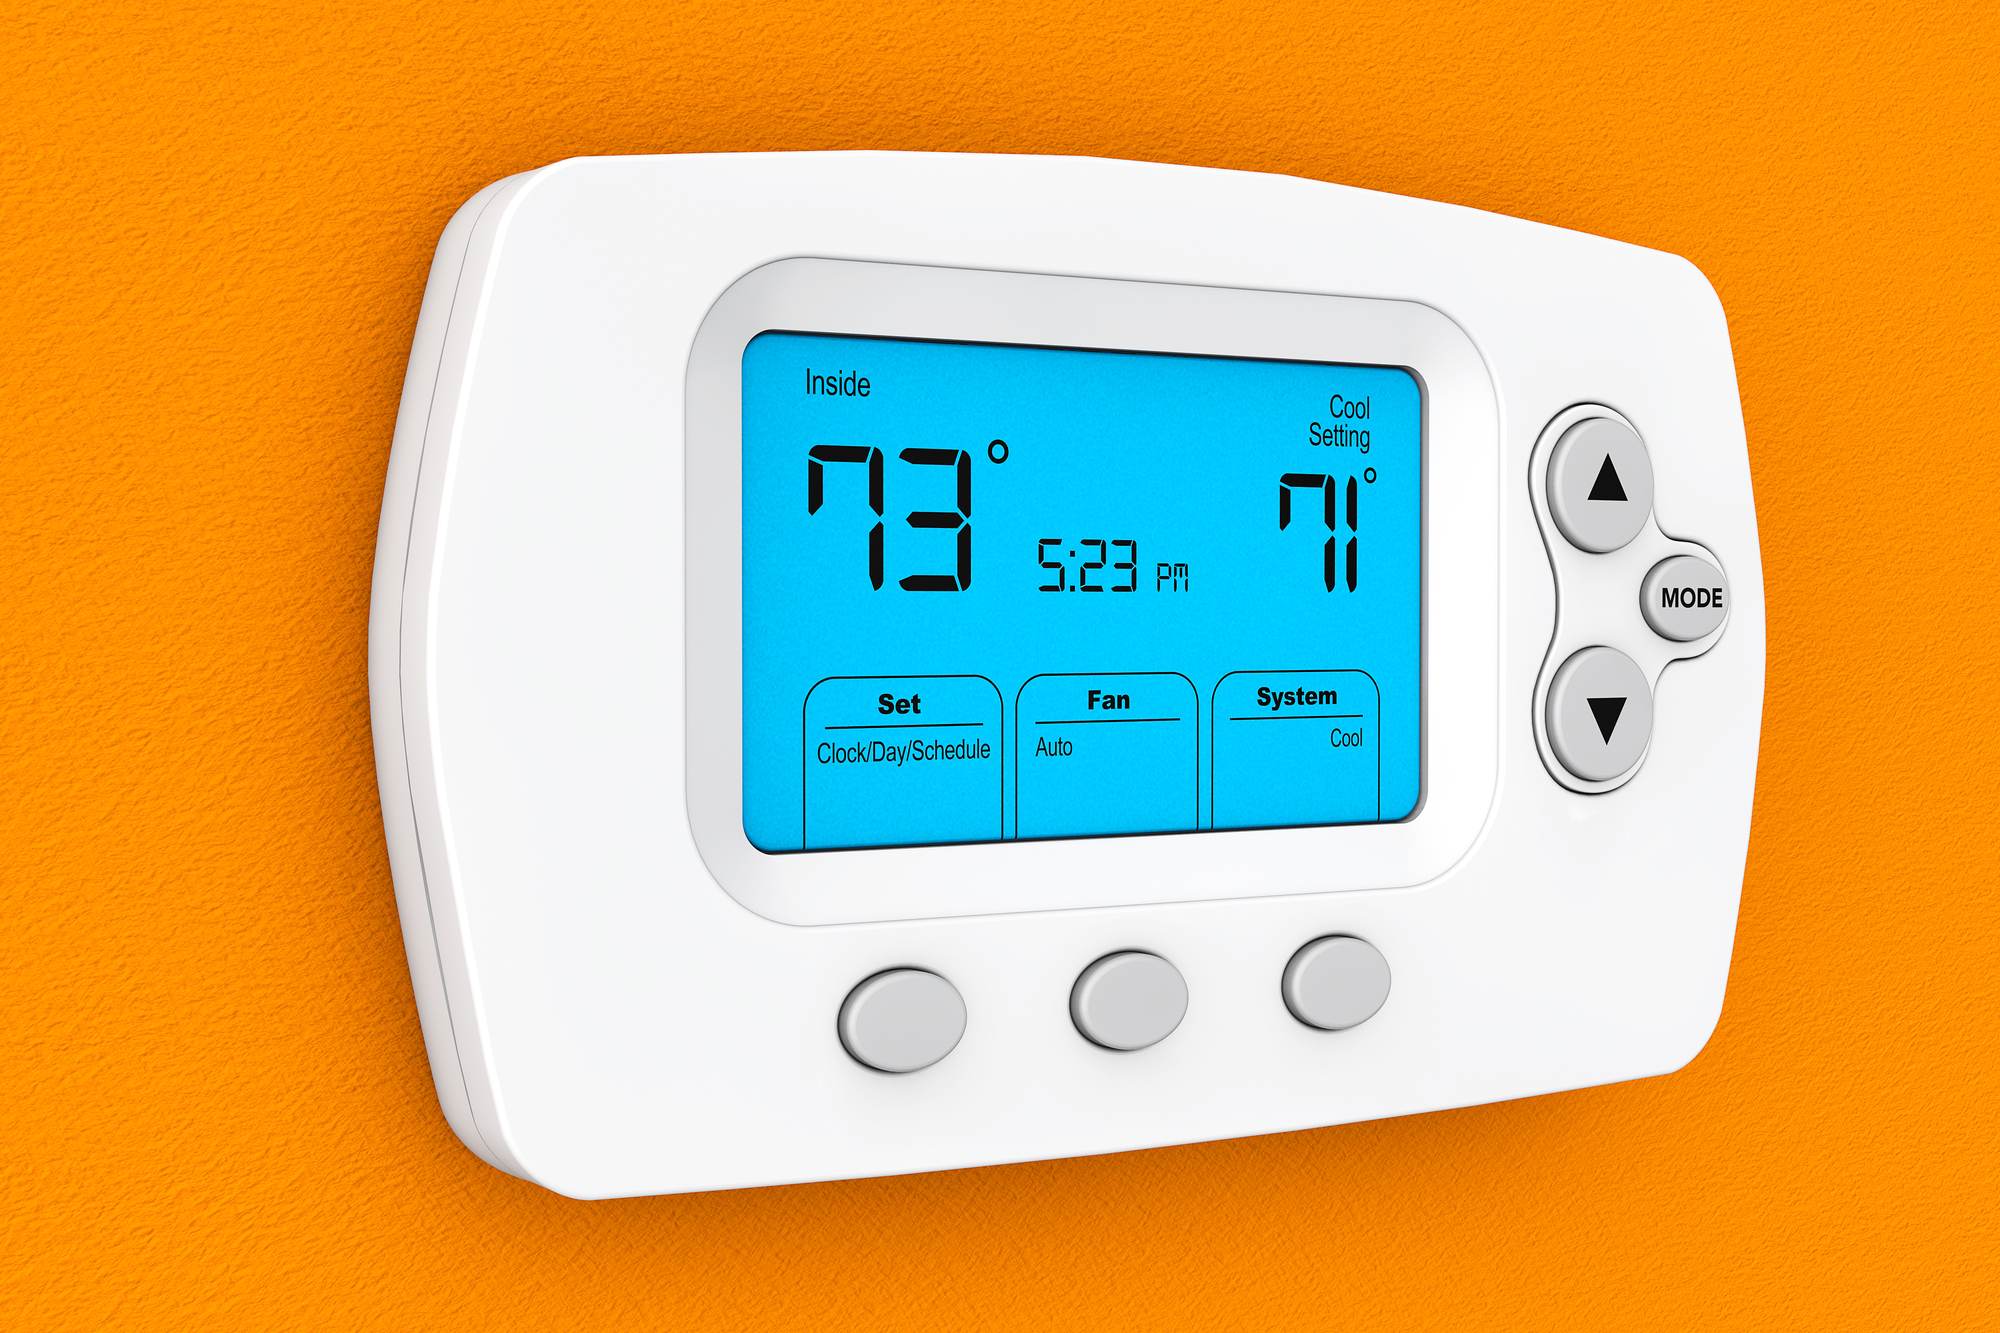 What is the Purpose of the Furnace Thermostat lux?